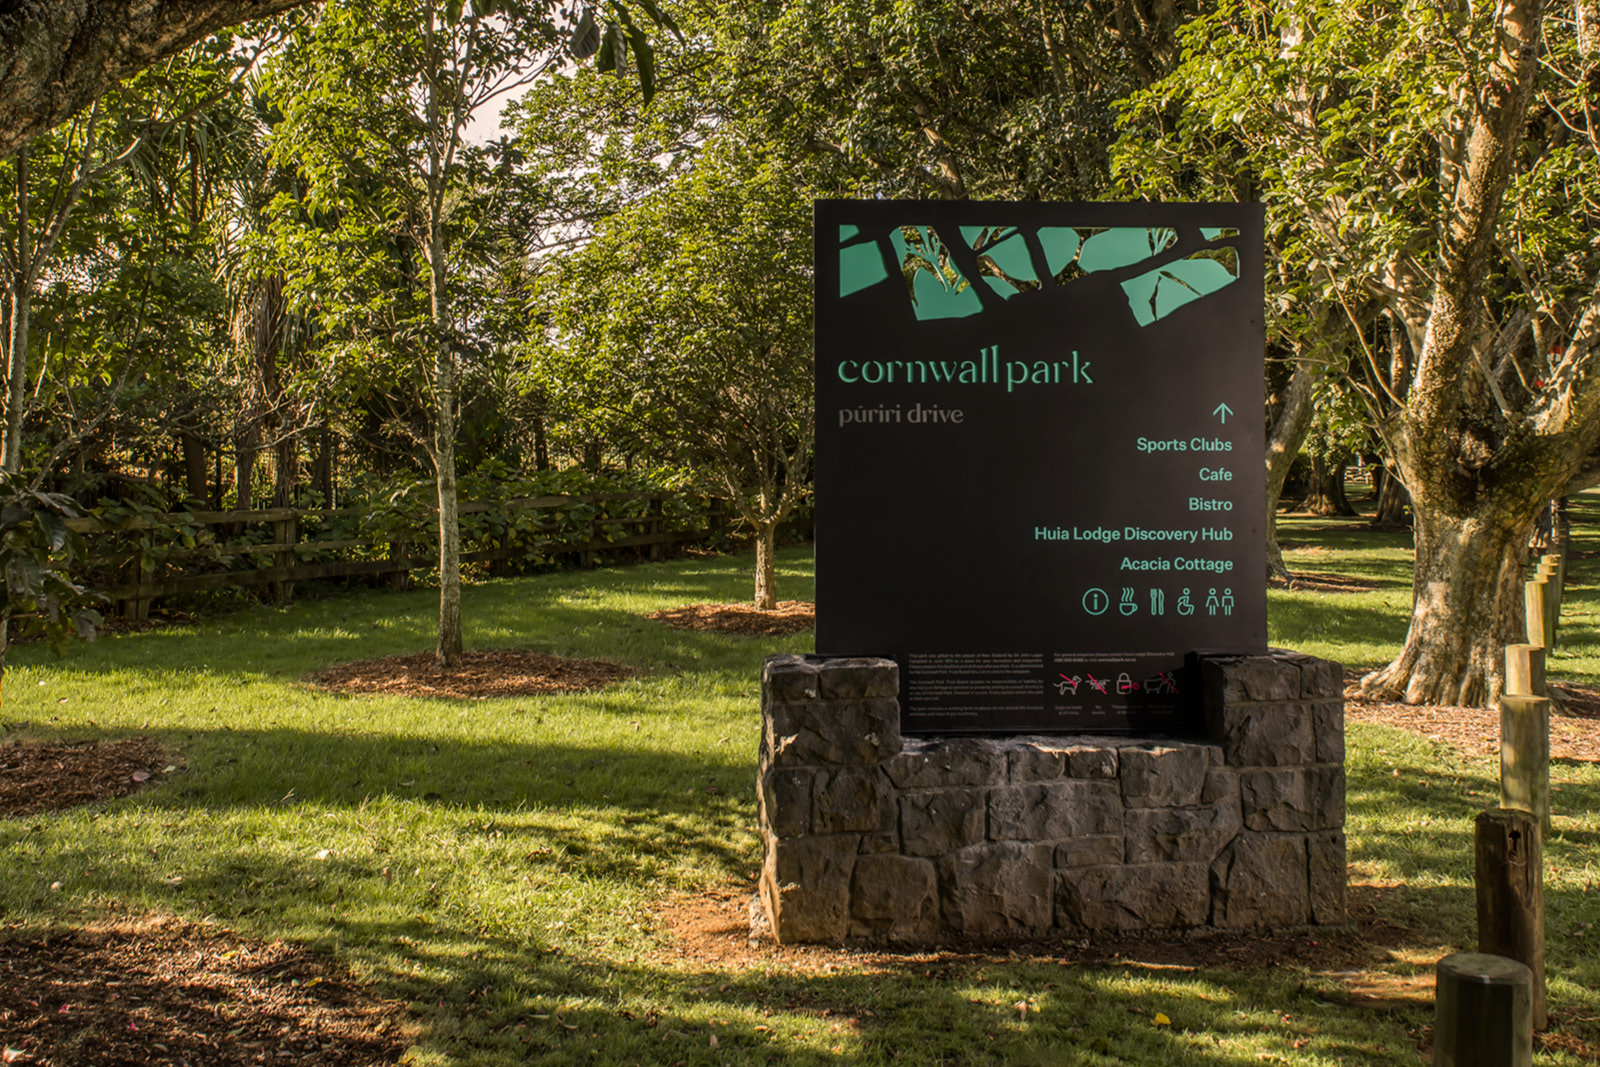 Wayfinding signage at the entrance to Cornwall Park